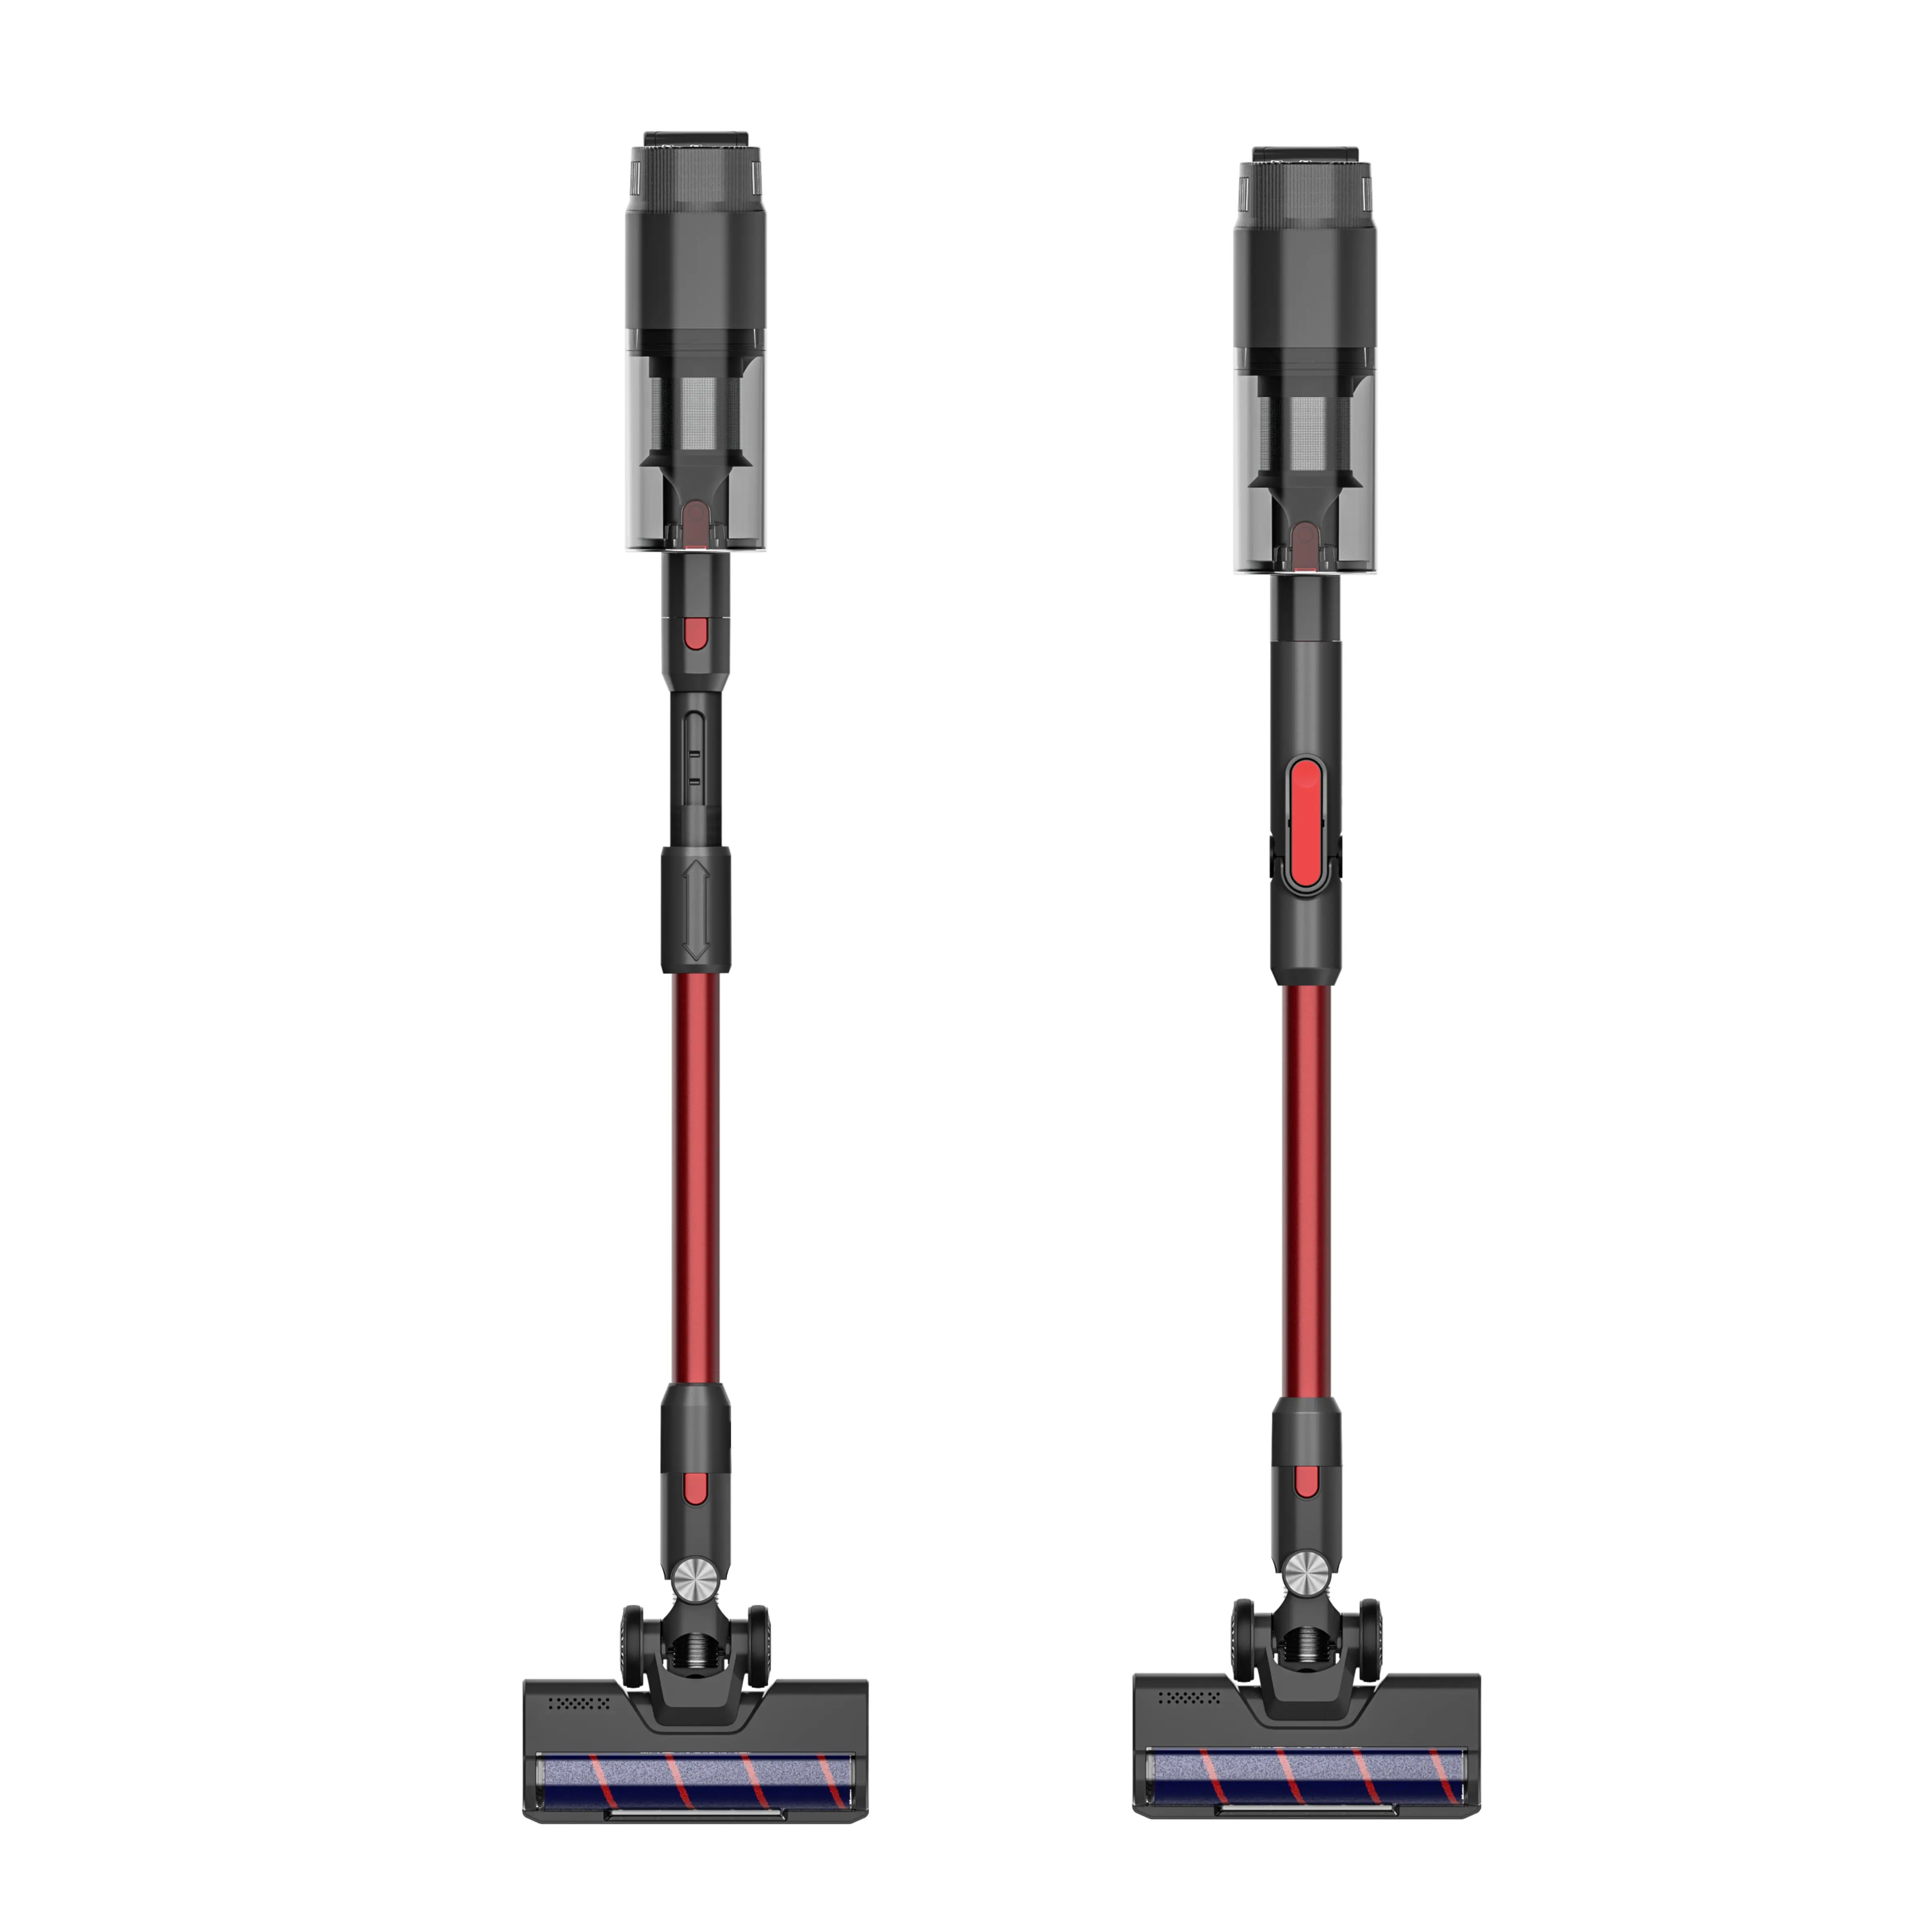 Powerful Portable Upright Vacuum Cleaner Dry Cordless Wireless Vacuum With LED digital screen